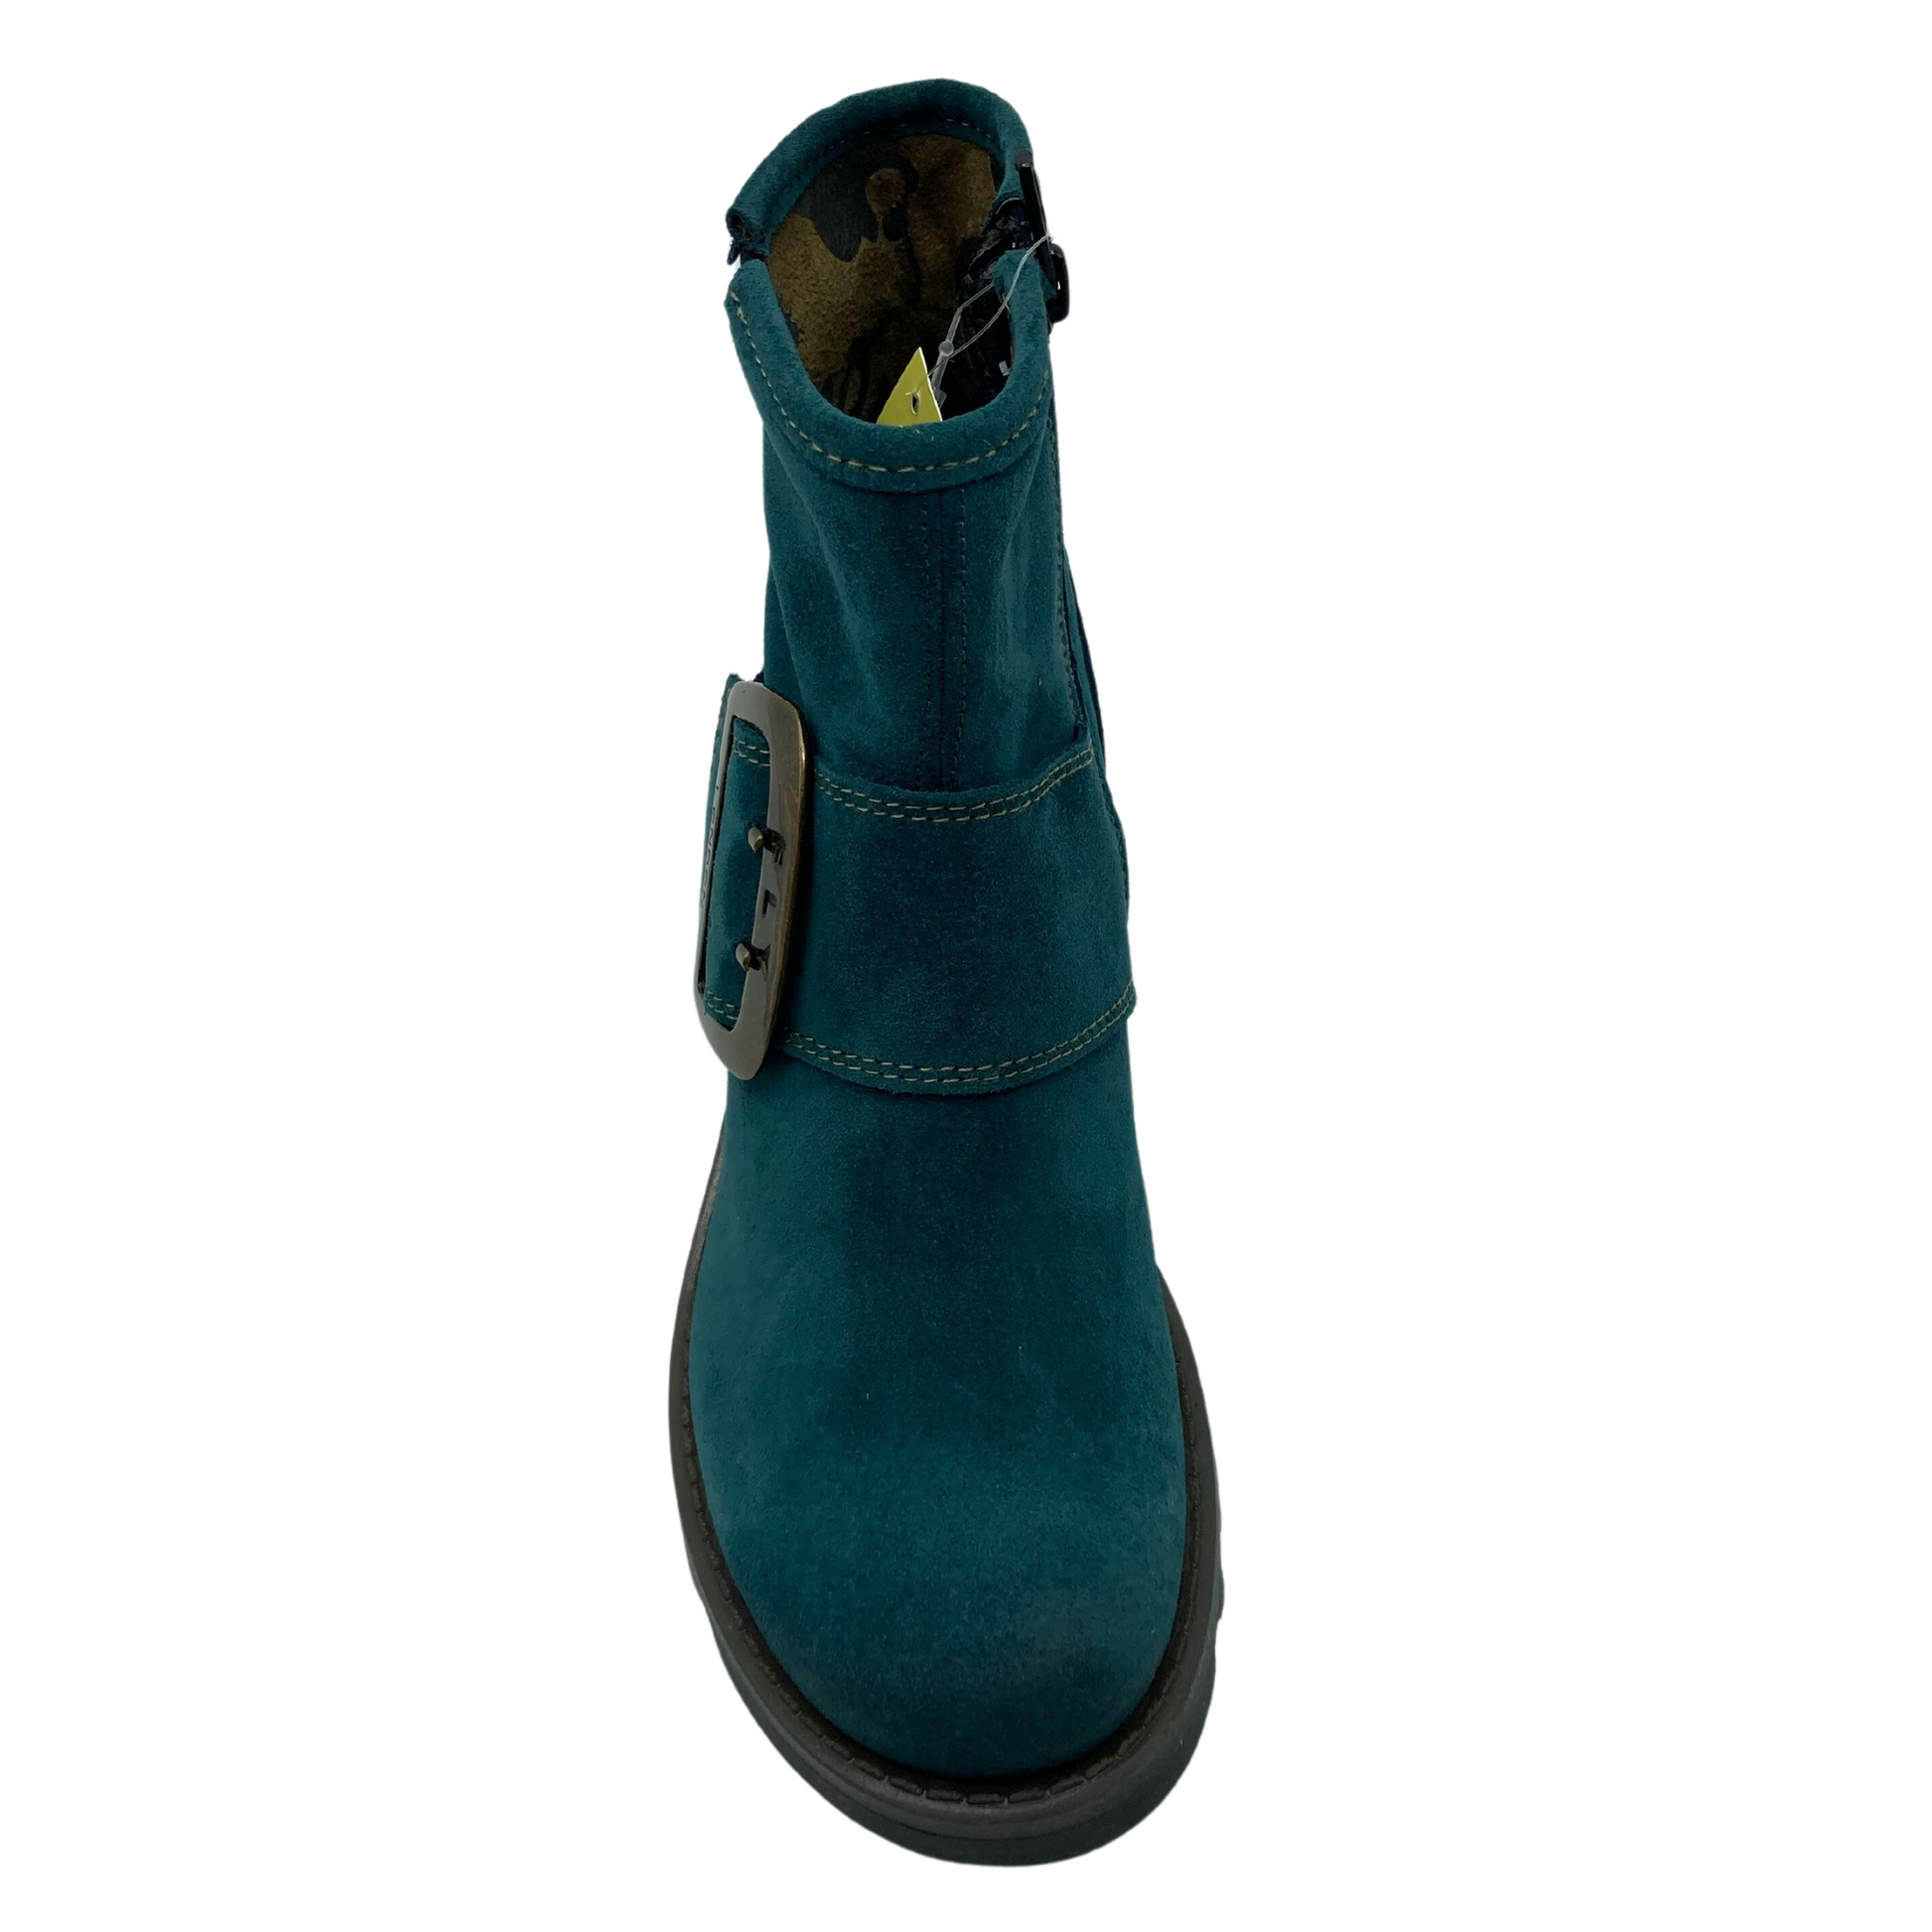 Top view of rounded toe suede boot with large buckle detail